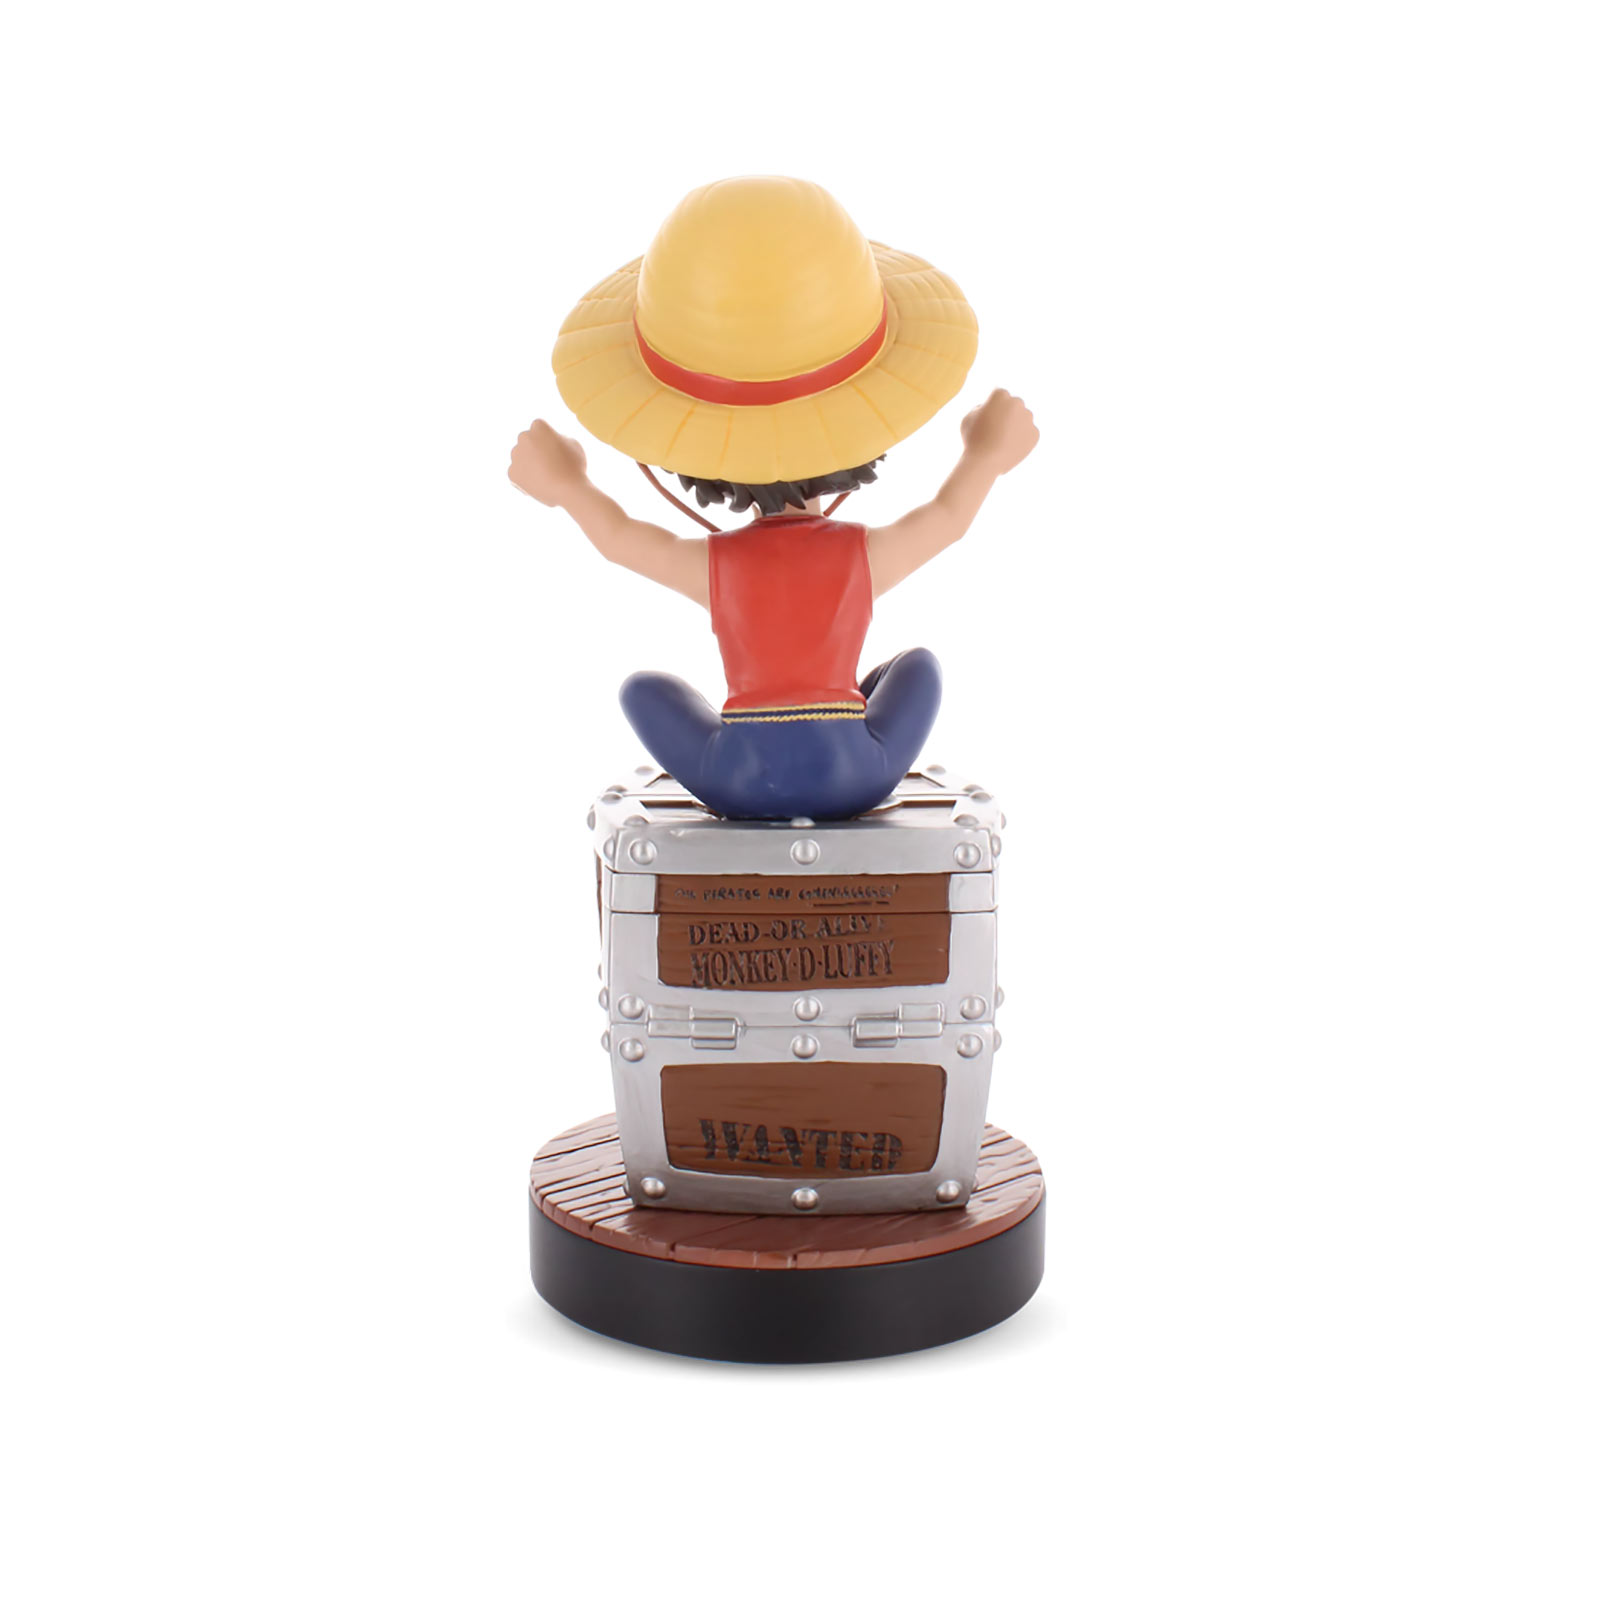 One Piece - Figurine Cable Guy Monkey D. Luffy